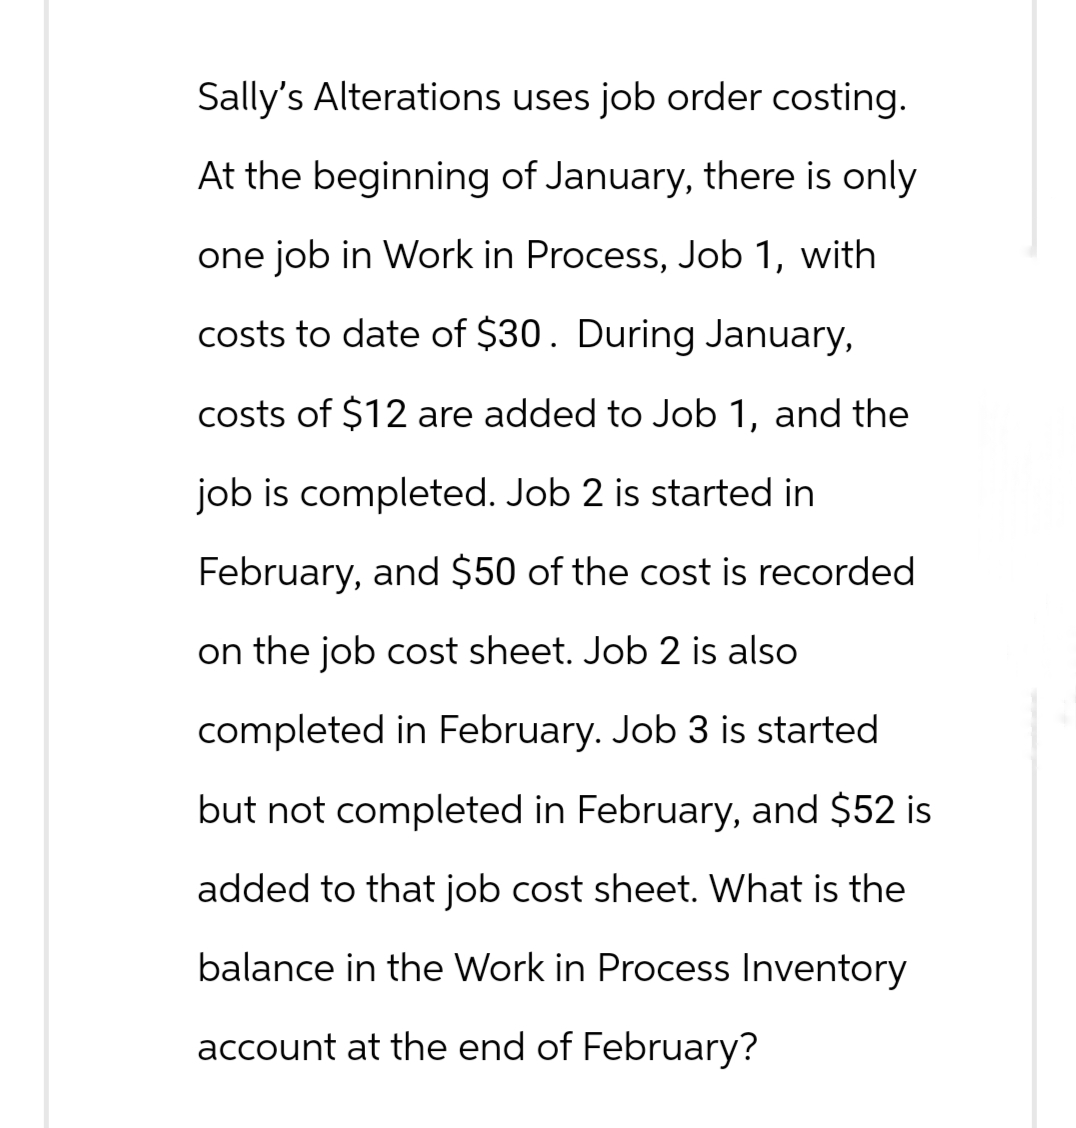 Sally's Alterations uses job order costing.
At the beginning of January, there is only
one job in Work in Process, Job 1, with
costs to date of $30. During January,
costs of $12 are added to Job 1, and the
job is completed. Job 2 is started in
February, and $50 of the cost is recorded
on the job cost sheet. Job 2 is also
completed in February. Job 3 is started
but not completed in February, and $52 is
added to that job cost sheet. What is the
balance in the Work in Process Inventory
account at the end of February?